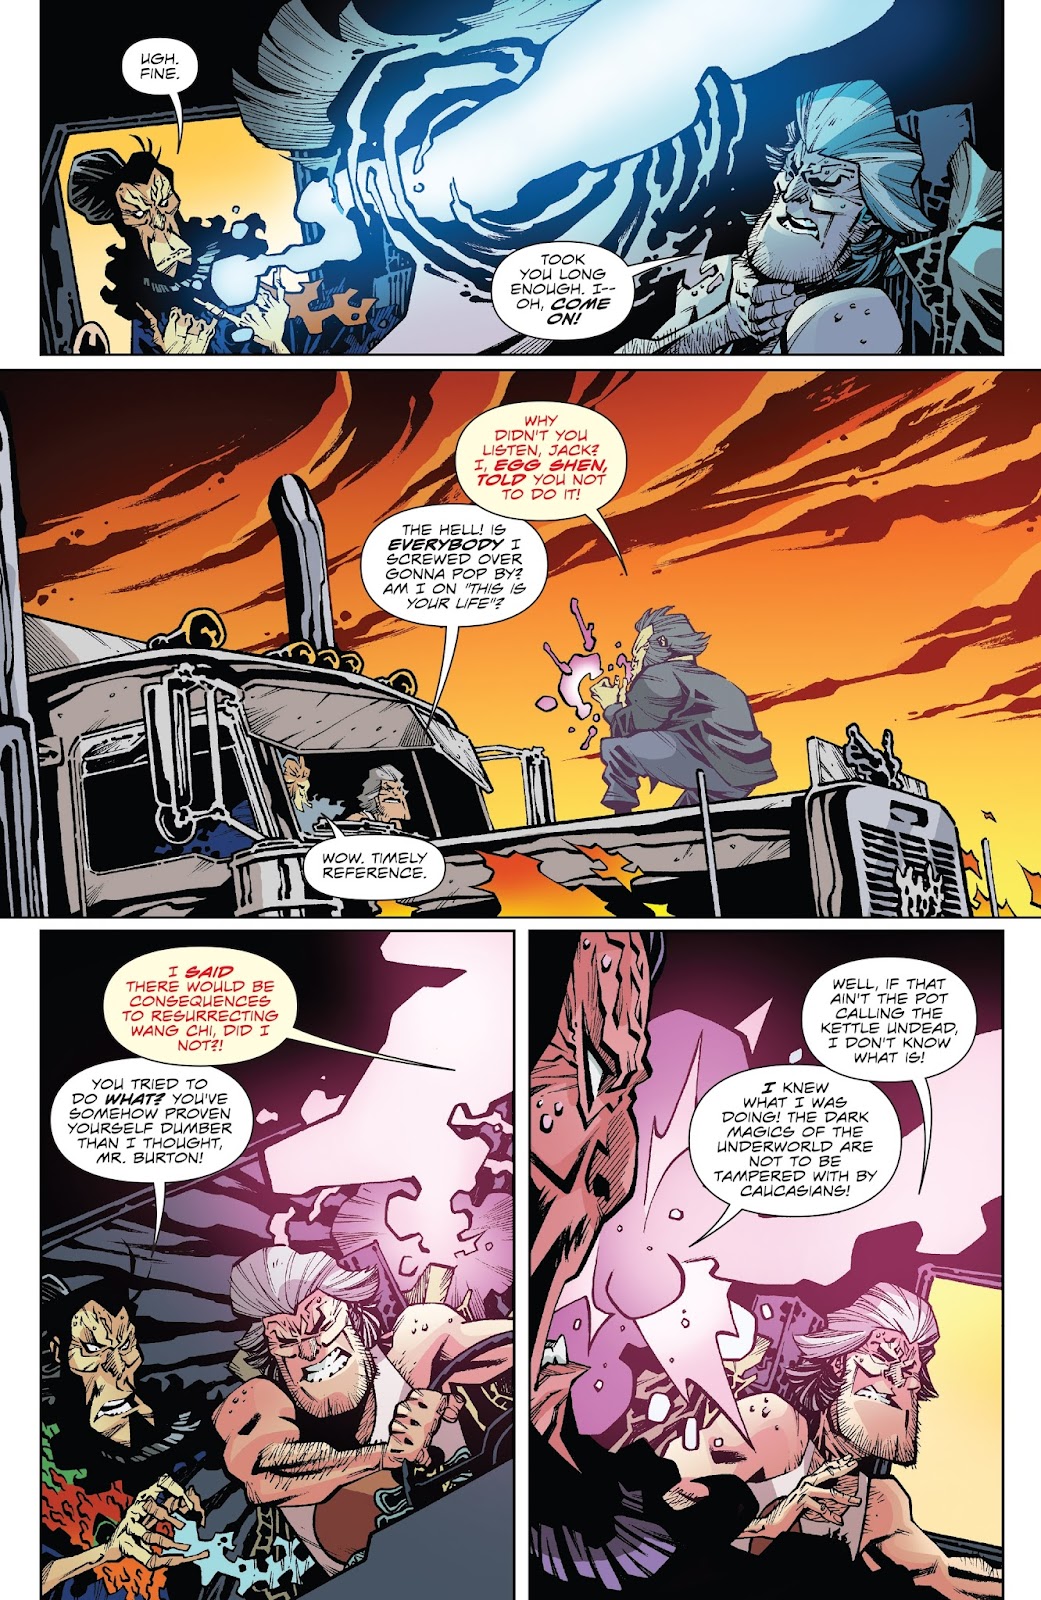 Big Trouble in Little China: Old Man Jack issue 3 - Page 15